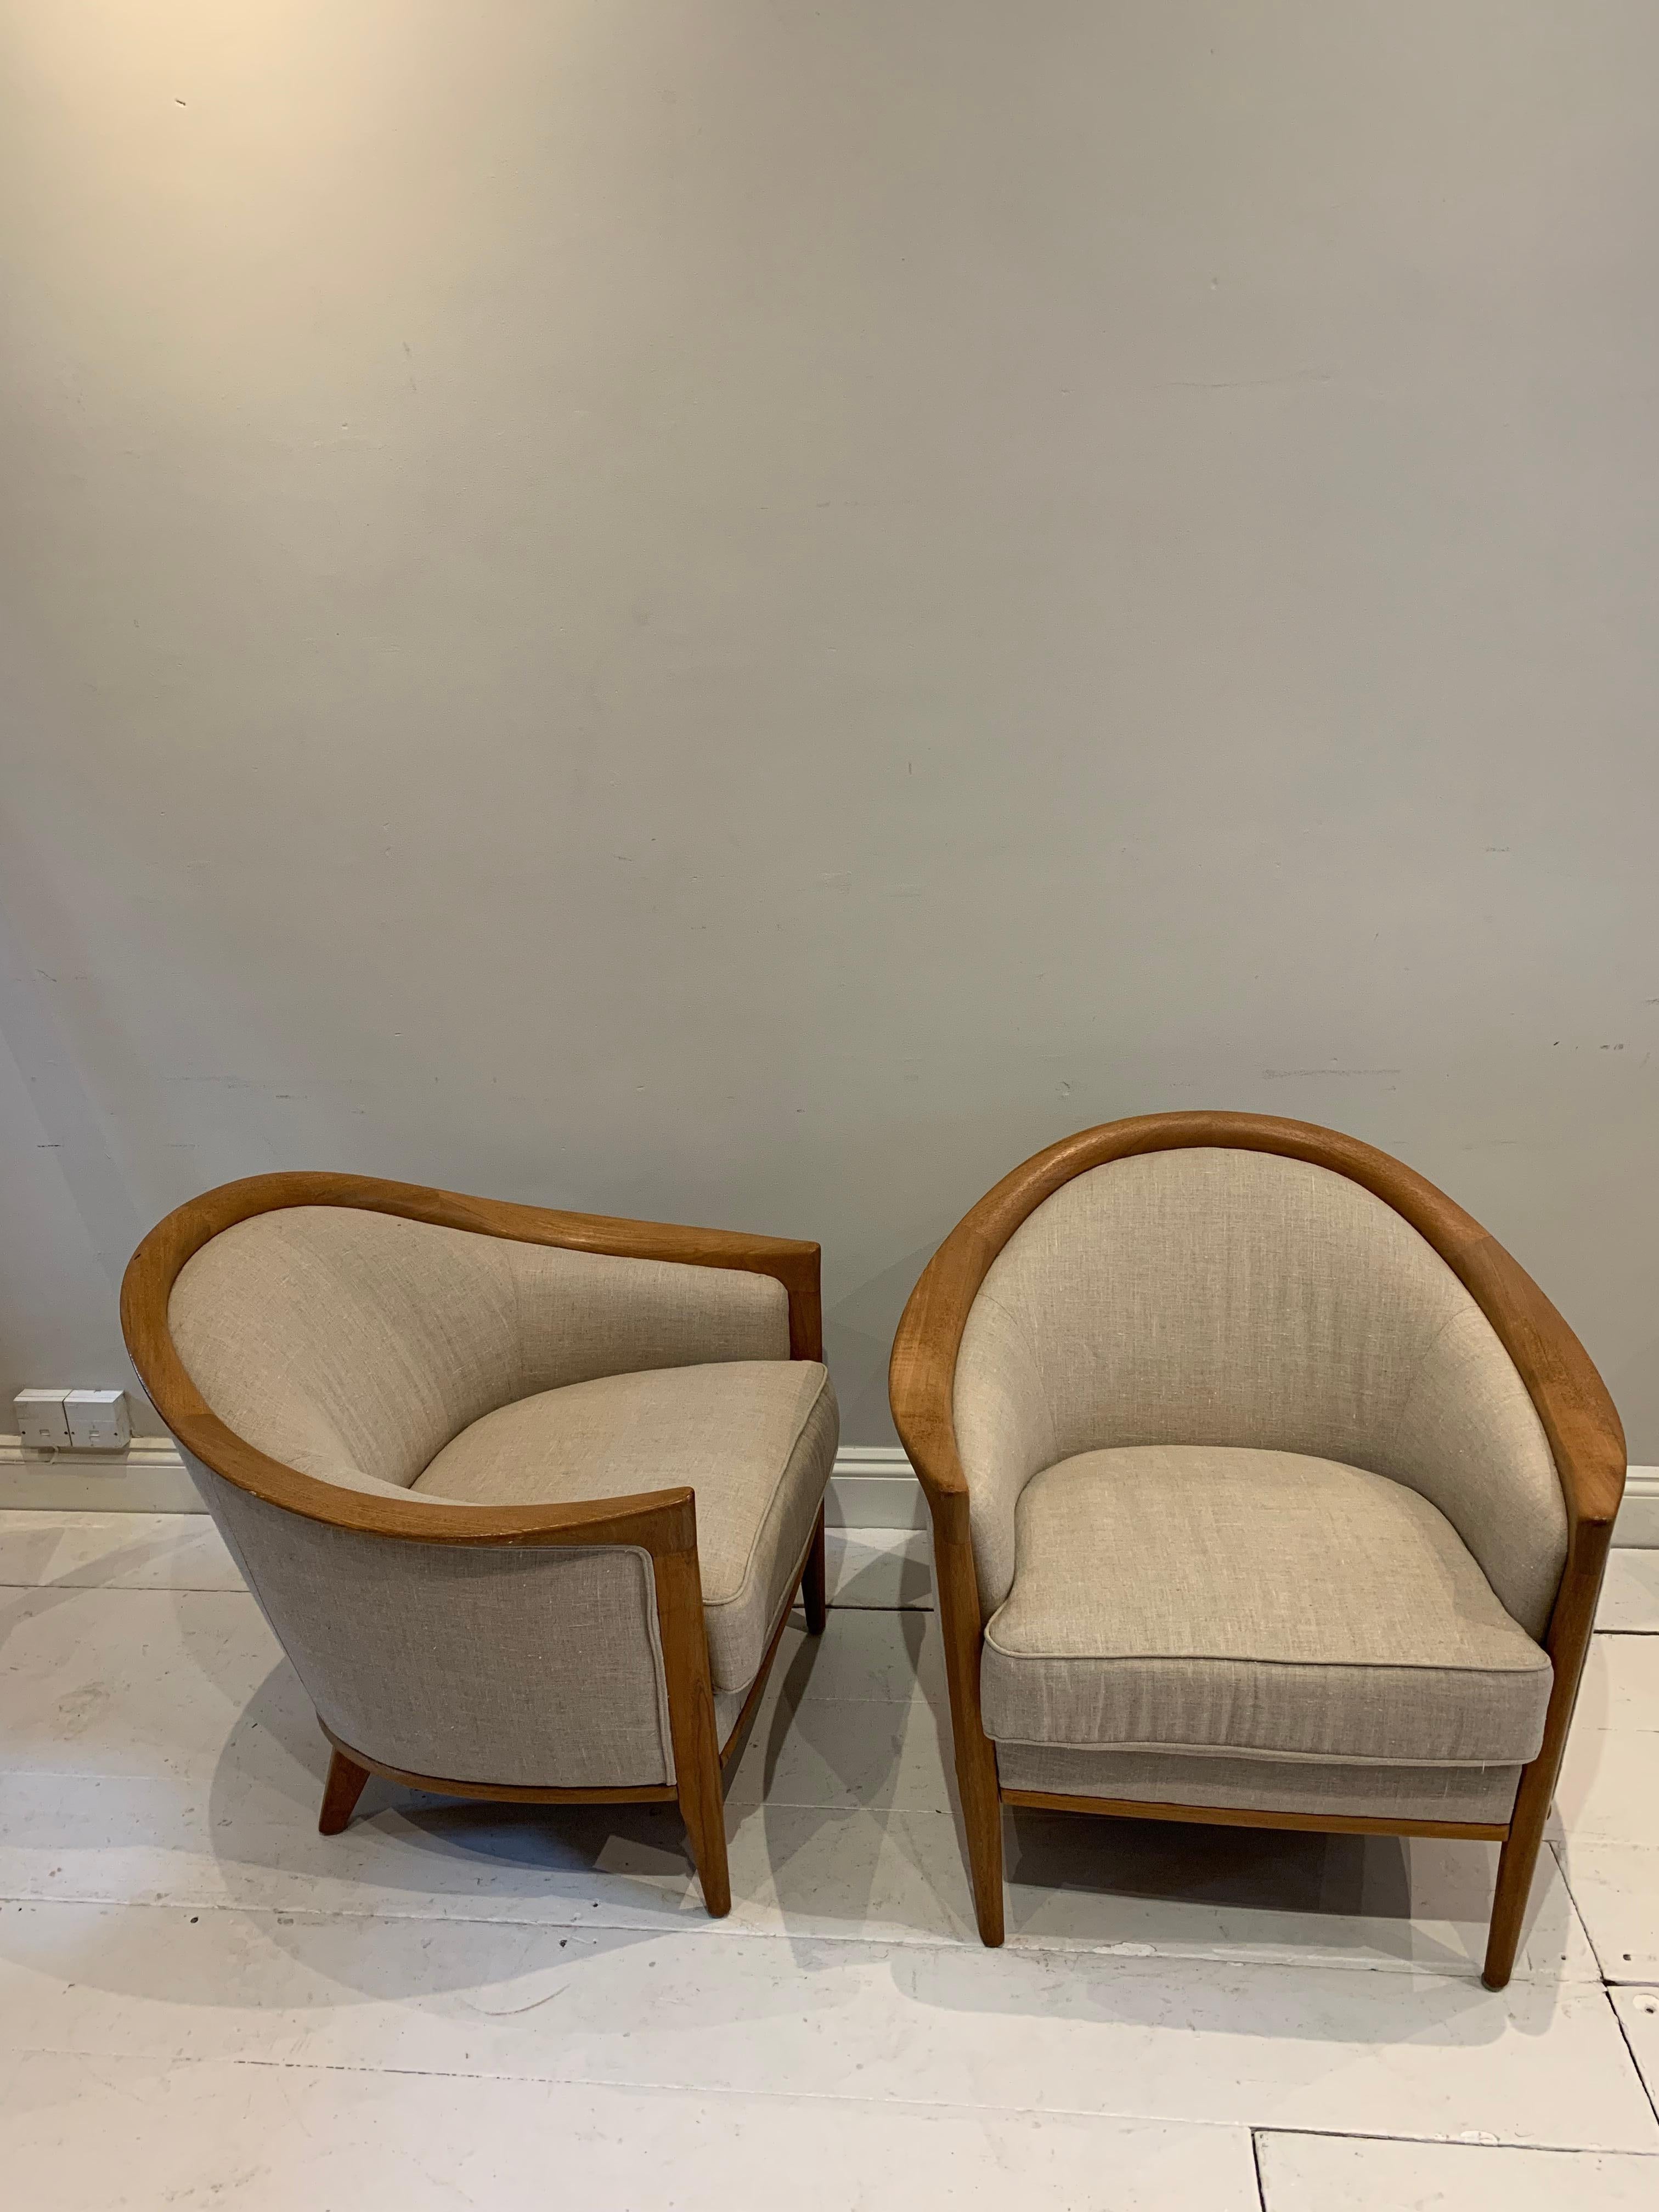 Mid-20th Century Pair of 1960s Swedish Oak Curved Armchairs Reupholstered in a Neutral Linen For Sale